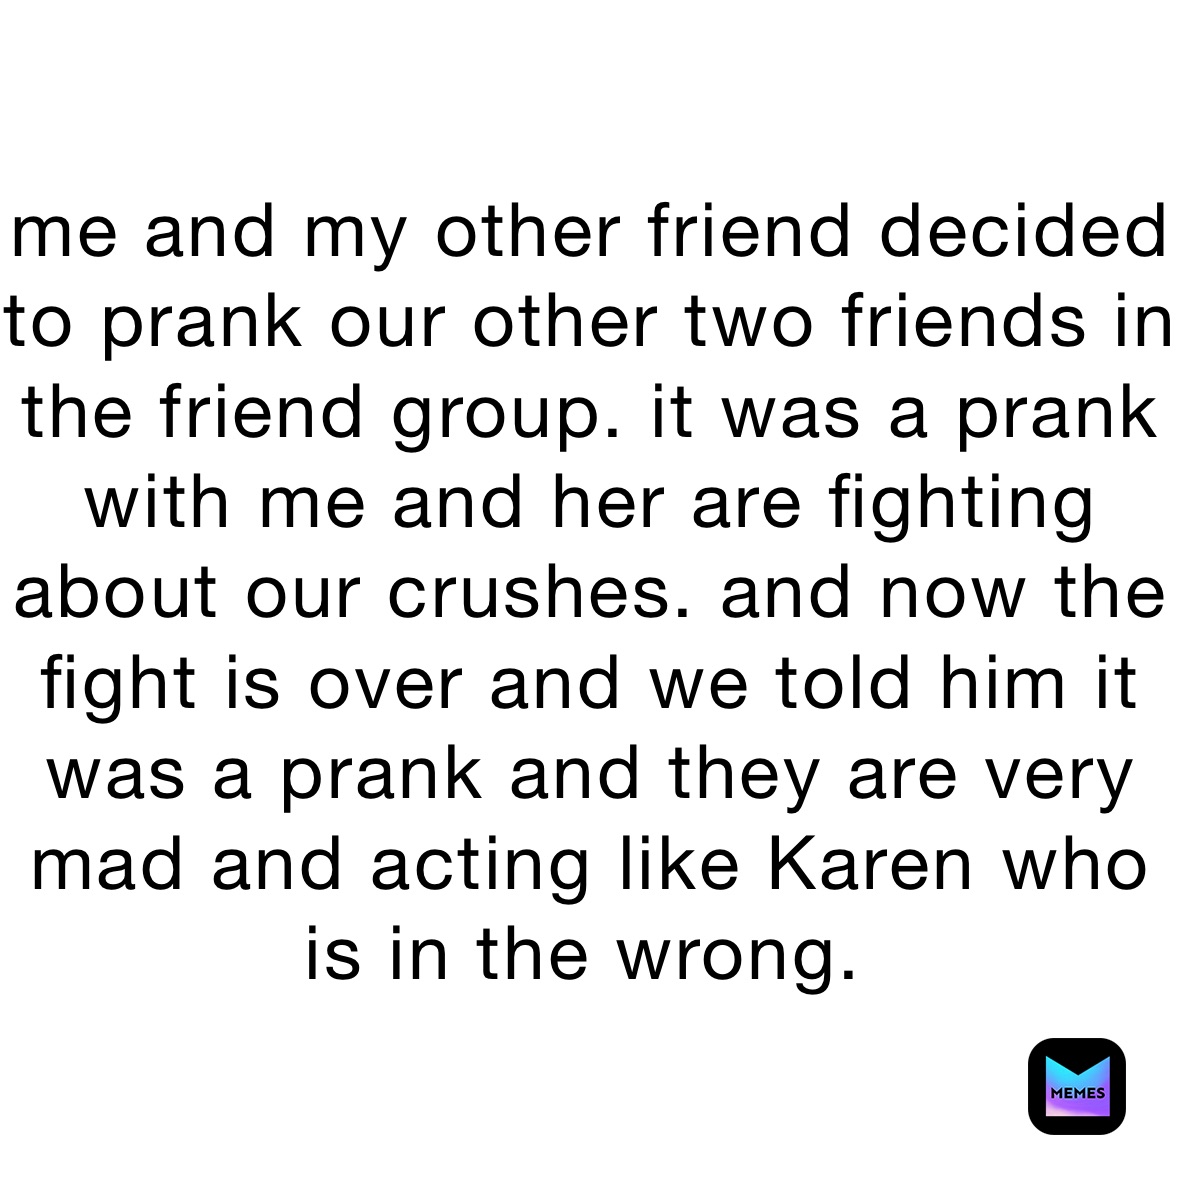 me and my other friend decided to prank our other two friends in the friend group. it was a prank with me and her are fighting about our crushes. and now the fight is over and we told him it was a prank and they are very mad and acting like Karen who is in the wrong.￼￼￼￼￼